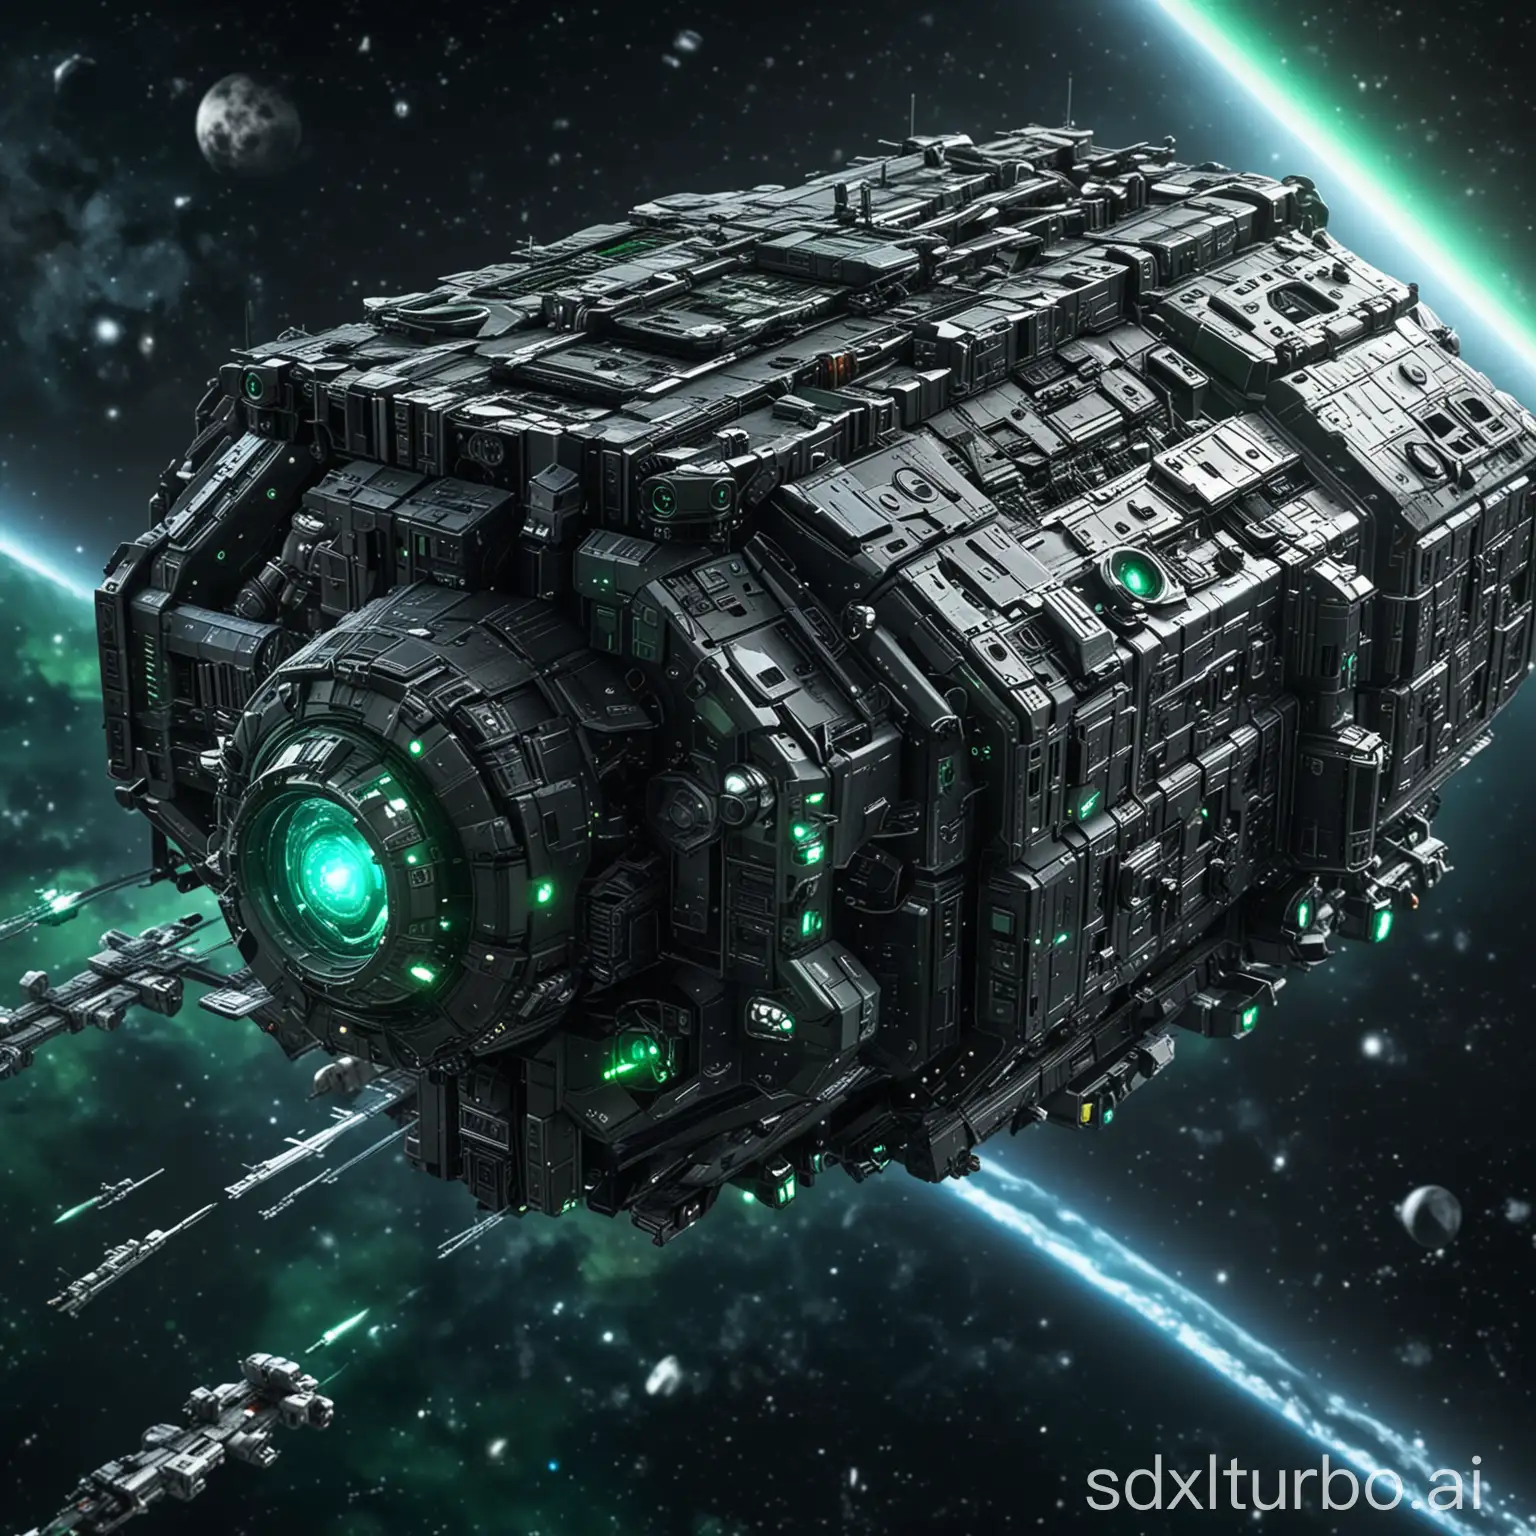 Isometric-Space-Station-in-HD-Dark-Atmosphere-with-Green-Lights